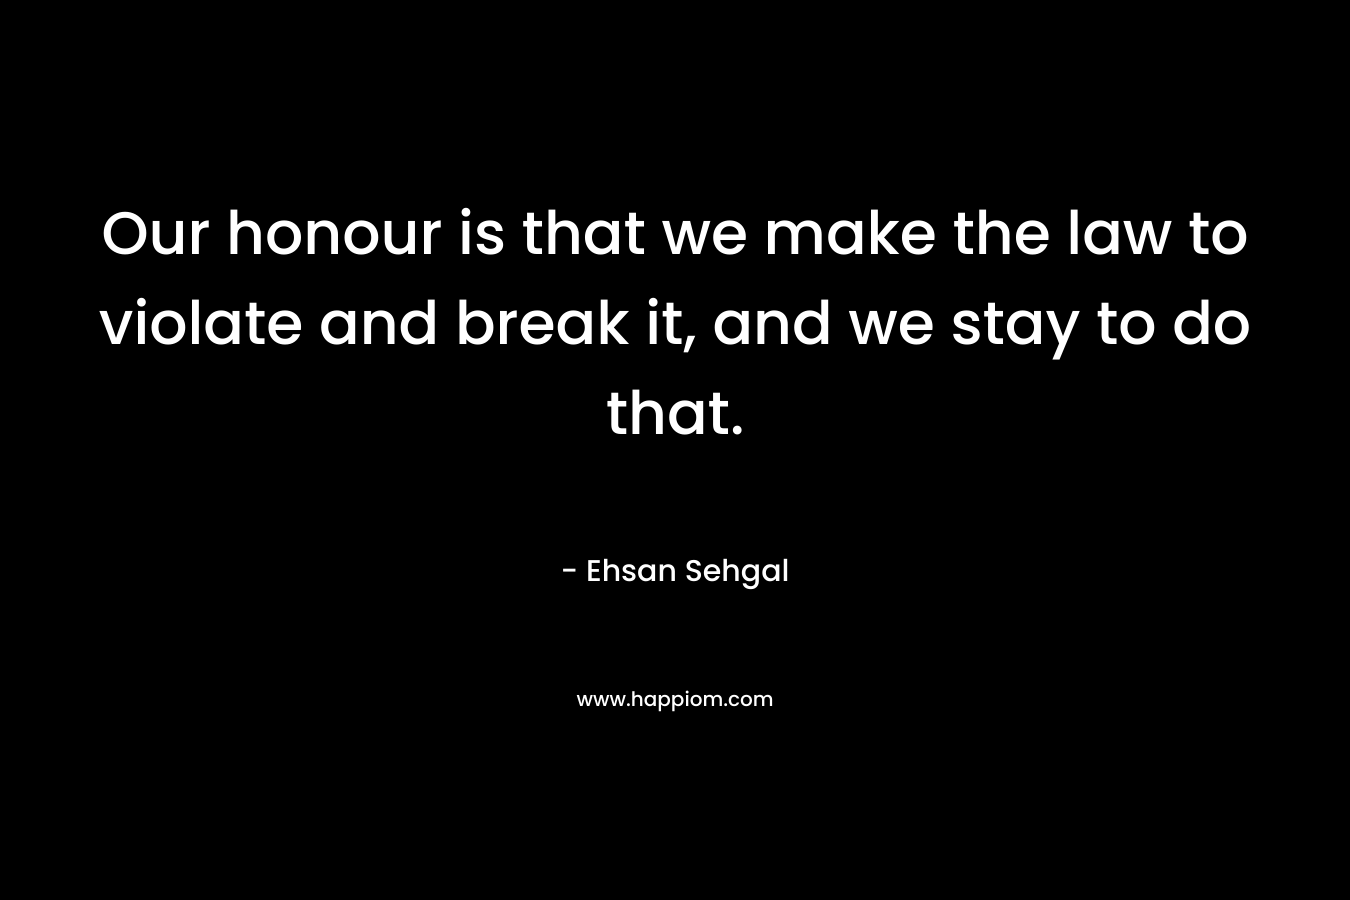 Our honour is that we make the law to violate and break it, and we stay to do that. – Ehsan Sehgal